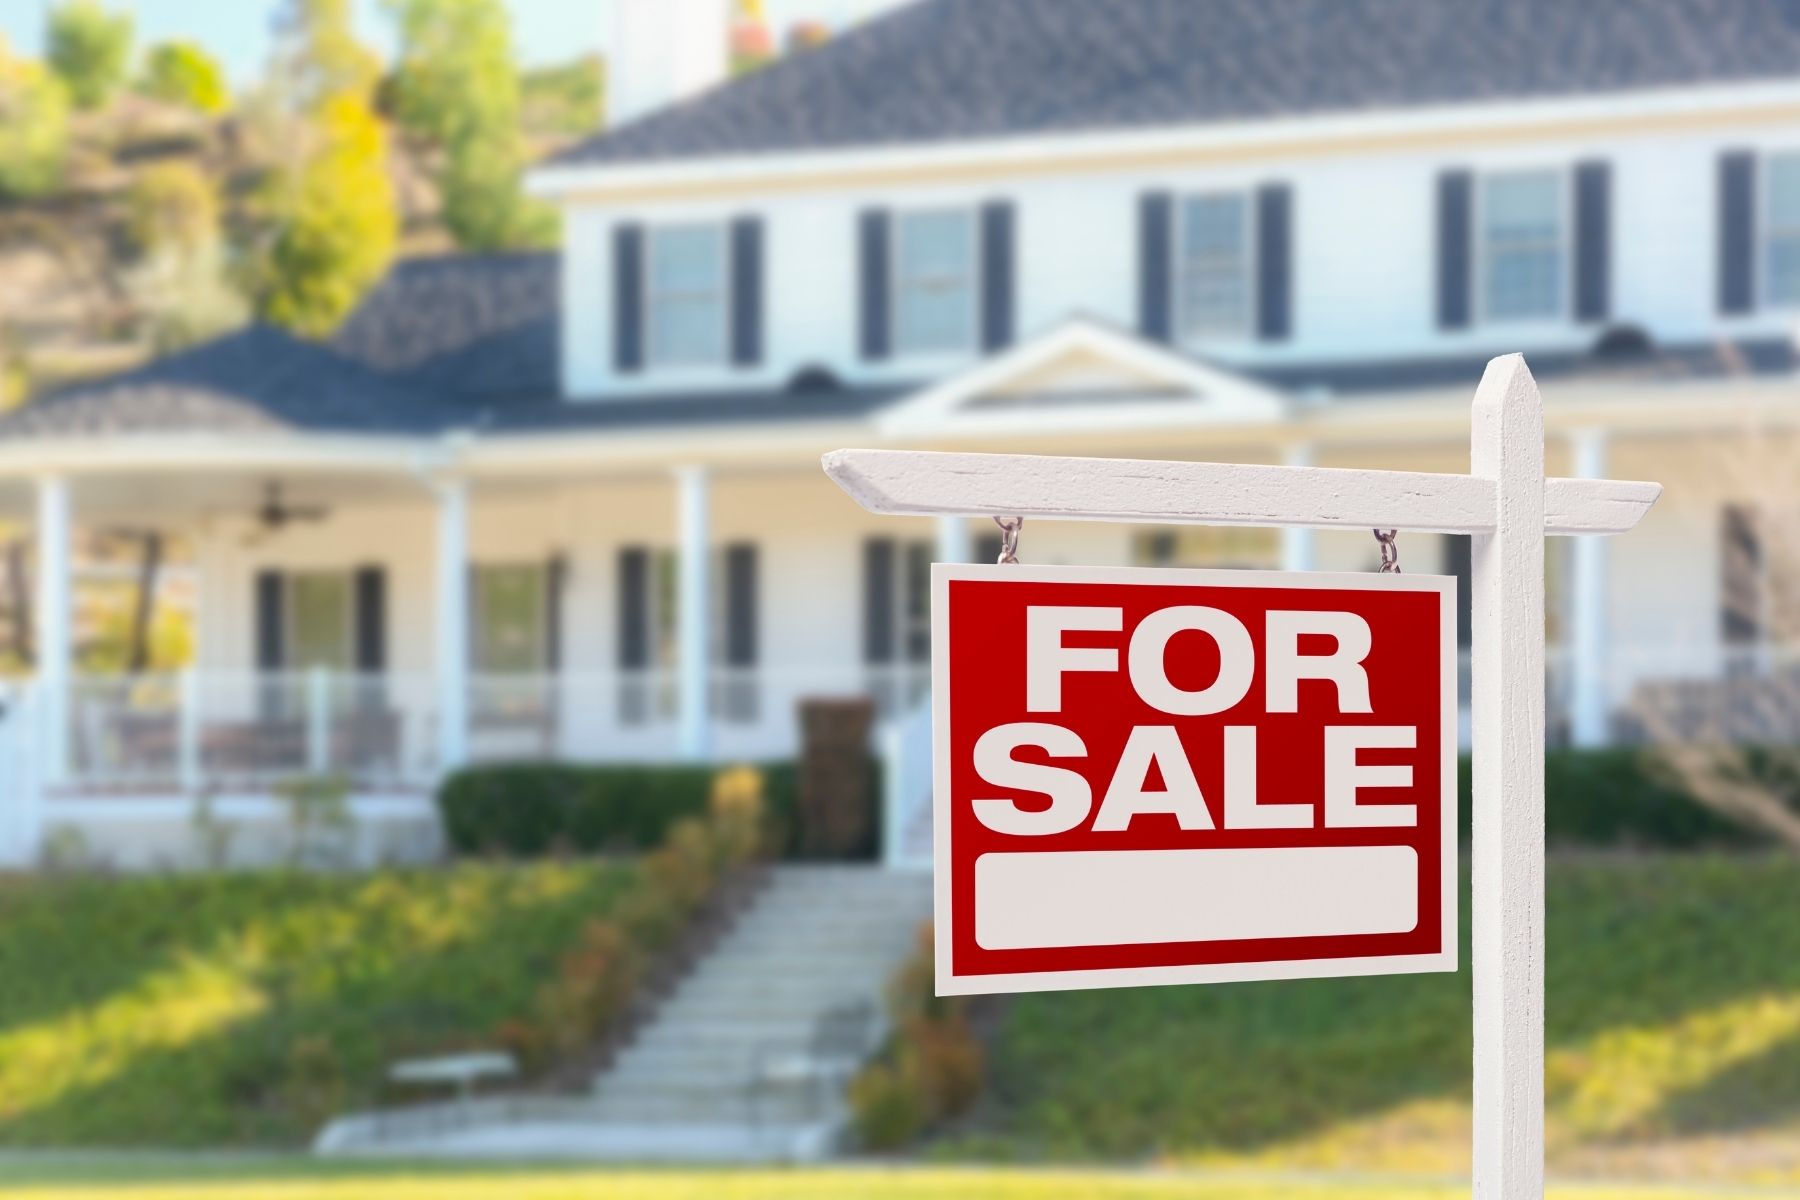 Mistakes to Avoid When Selling Your Home